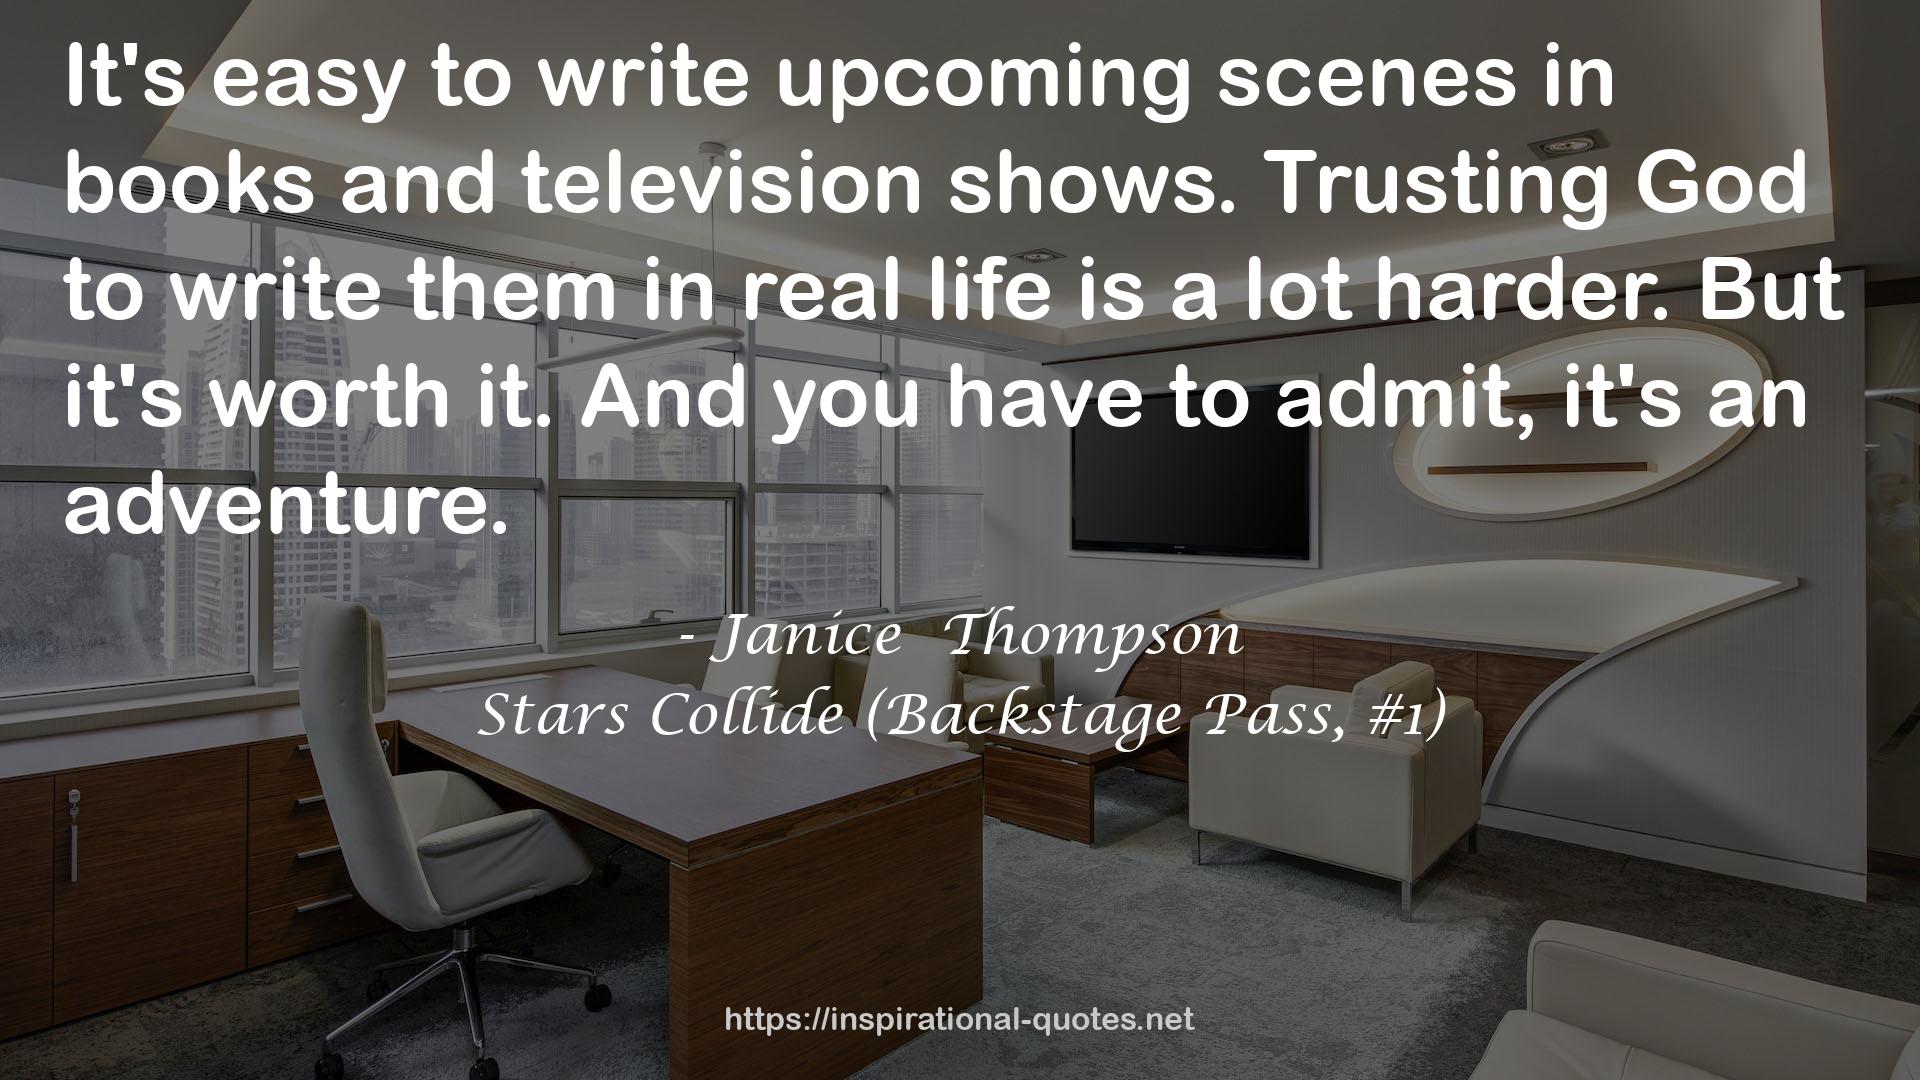 Stars Collide (Backstage Pass, #1) QUOTES